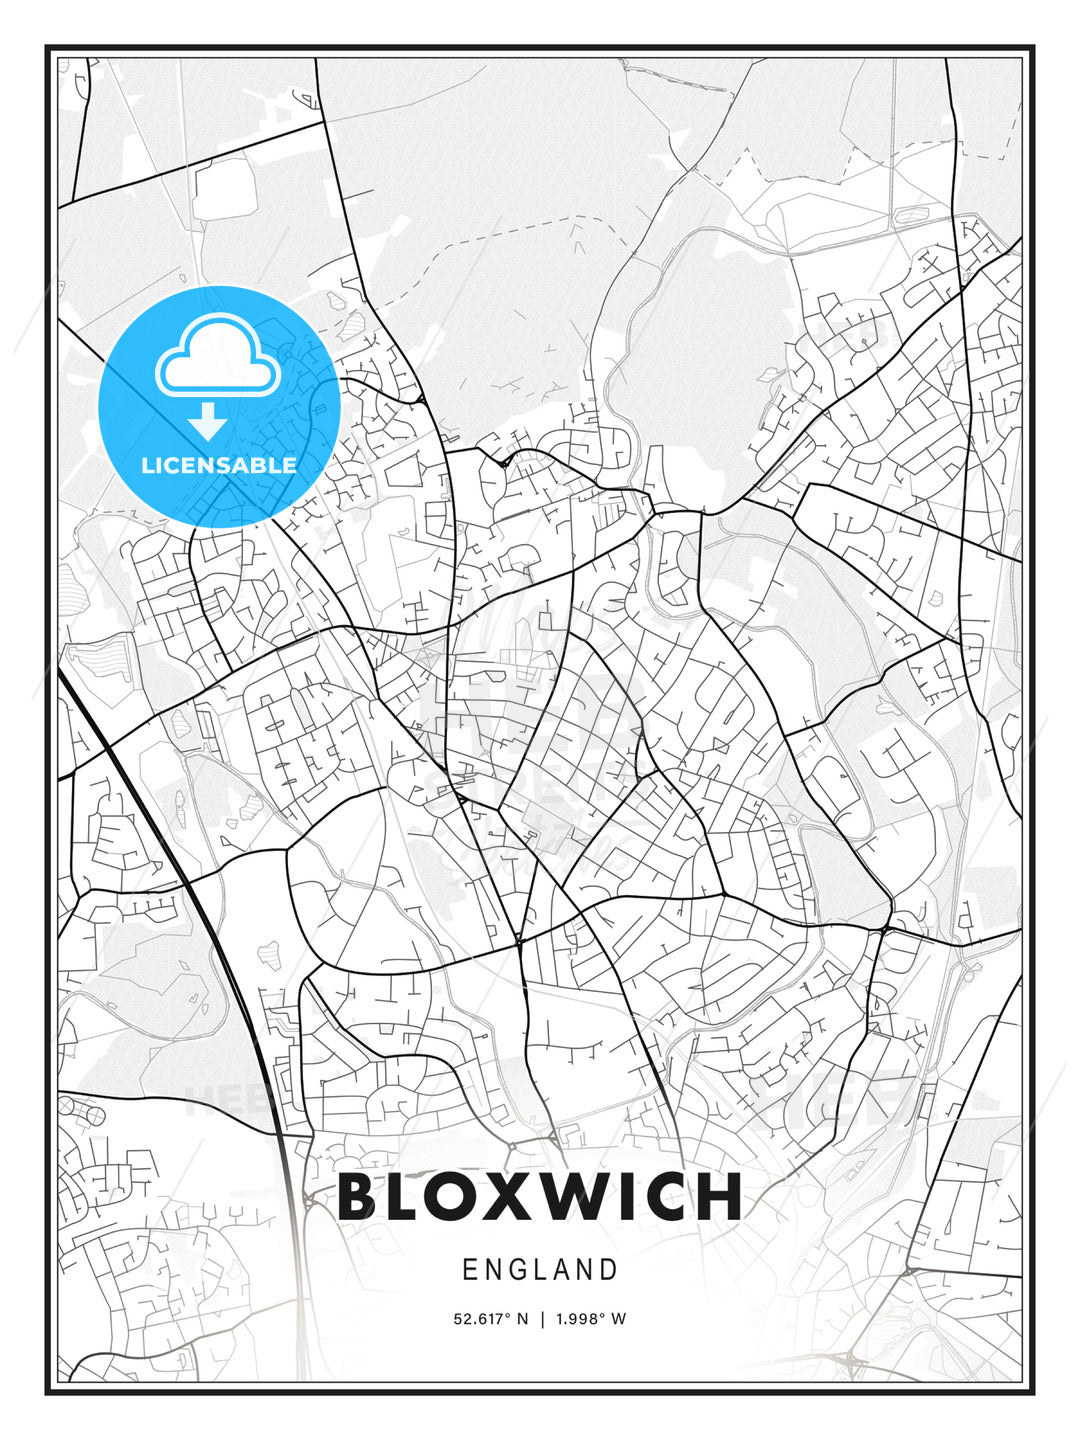 Bloxwich, England, Modern Print Template in Various Formats - HEBSTREITS Sketches